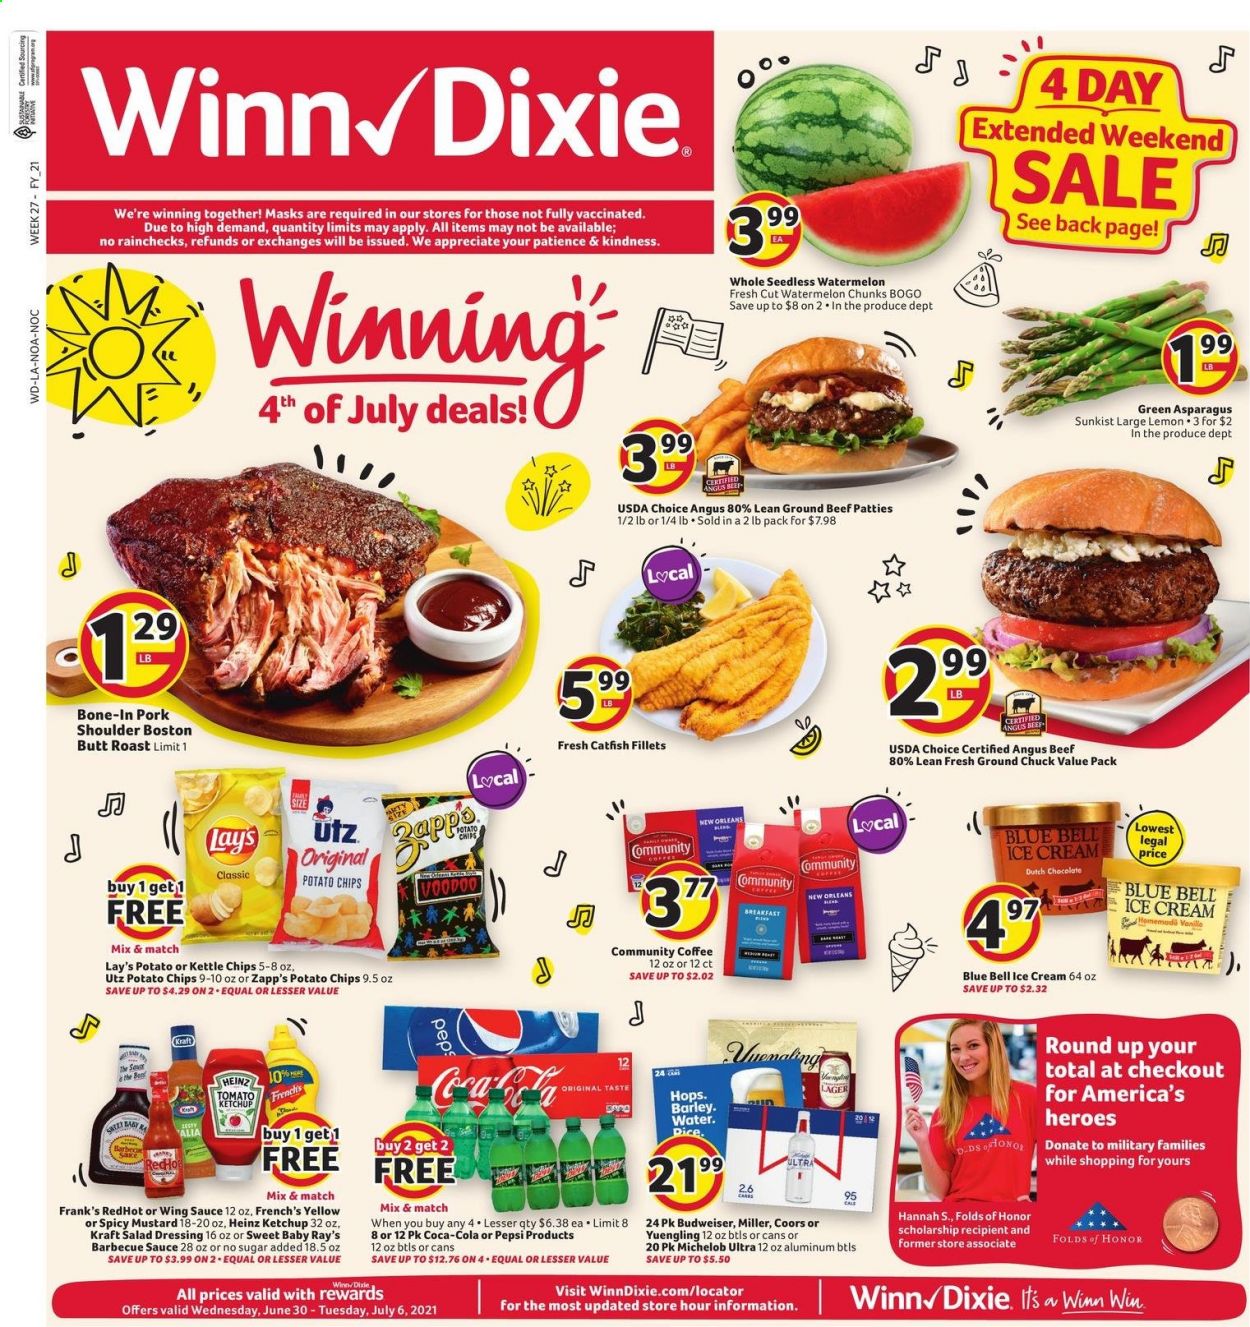 thumbnail - Winn Dixie Flyer - 06/30/2021 - 07/06/2021 - Sales products - asparagus, watermelon, catfish, sauce, Kraft®, ice cream, Blue Bell, potato chips, chips, Lay’s, Heinz, BBQ sauce, mustard, salad dressing, ketchup, dressing, wing sauce, Coca-Cola, Pepsi, coffee, beer, Budweiser, Coors, Yuengling, Michelob, Miller, Lager, beef meat, ground beef, ground chuck, pork meat, pork shoulder. Page 1.